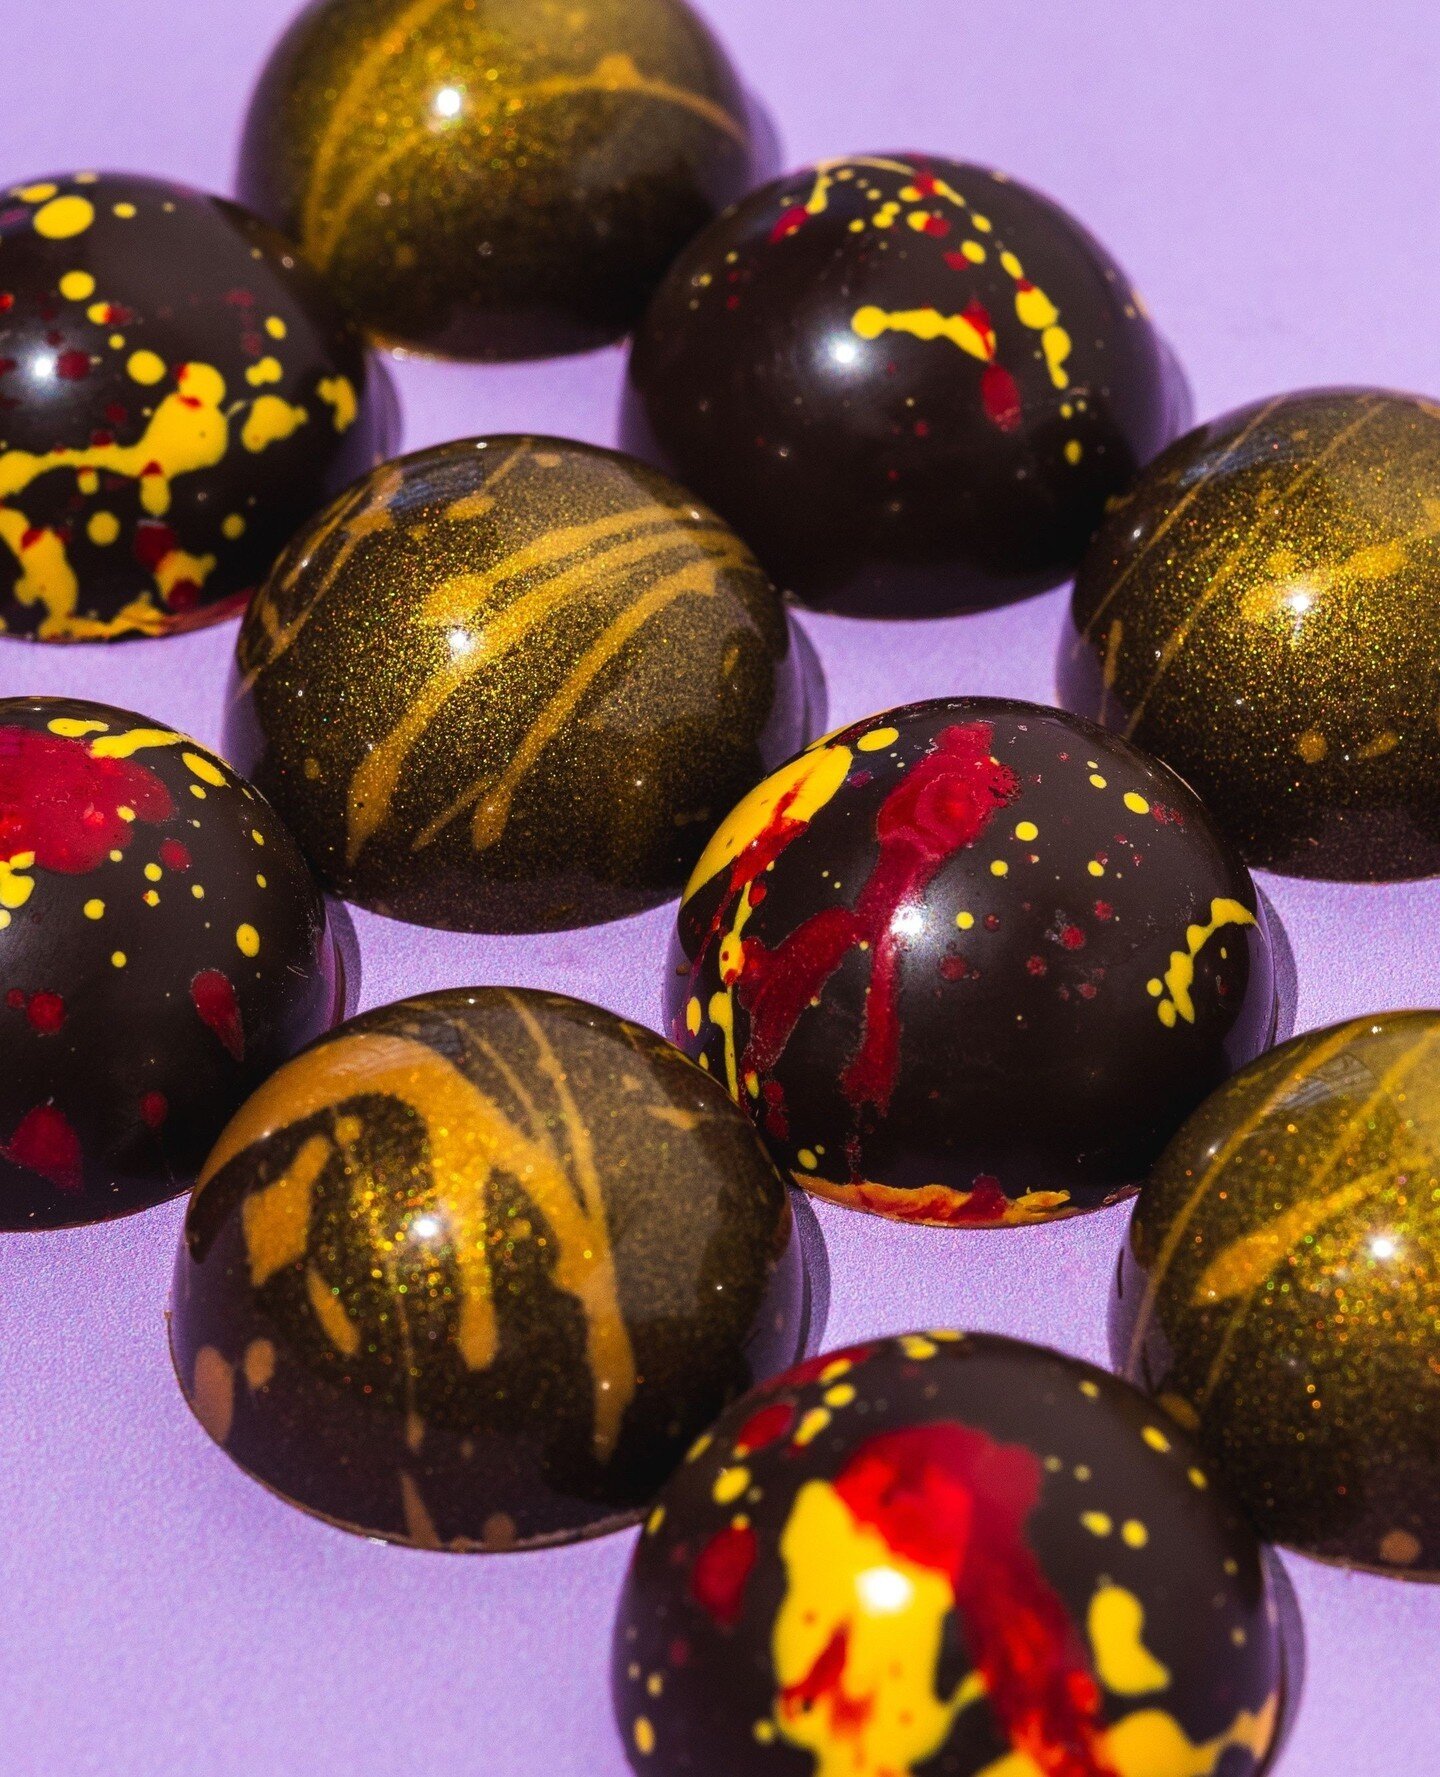 Our signature bonbons all dressed up for Easter weekend ~ strawberry pineapple ganaches + chocolate chip cookie-infused milk chocolate ganache.⁠
⁠
#vancouver #igersvancouver #yvreats #vancouverfoodie #chocolates